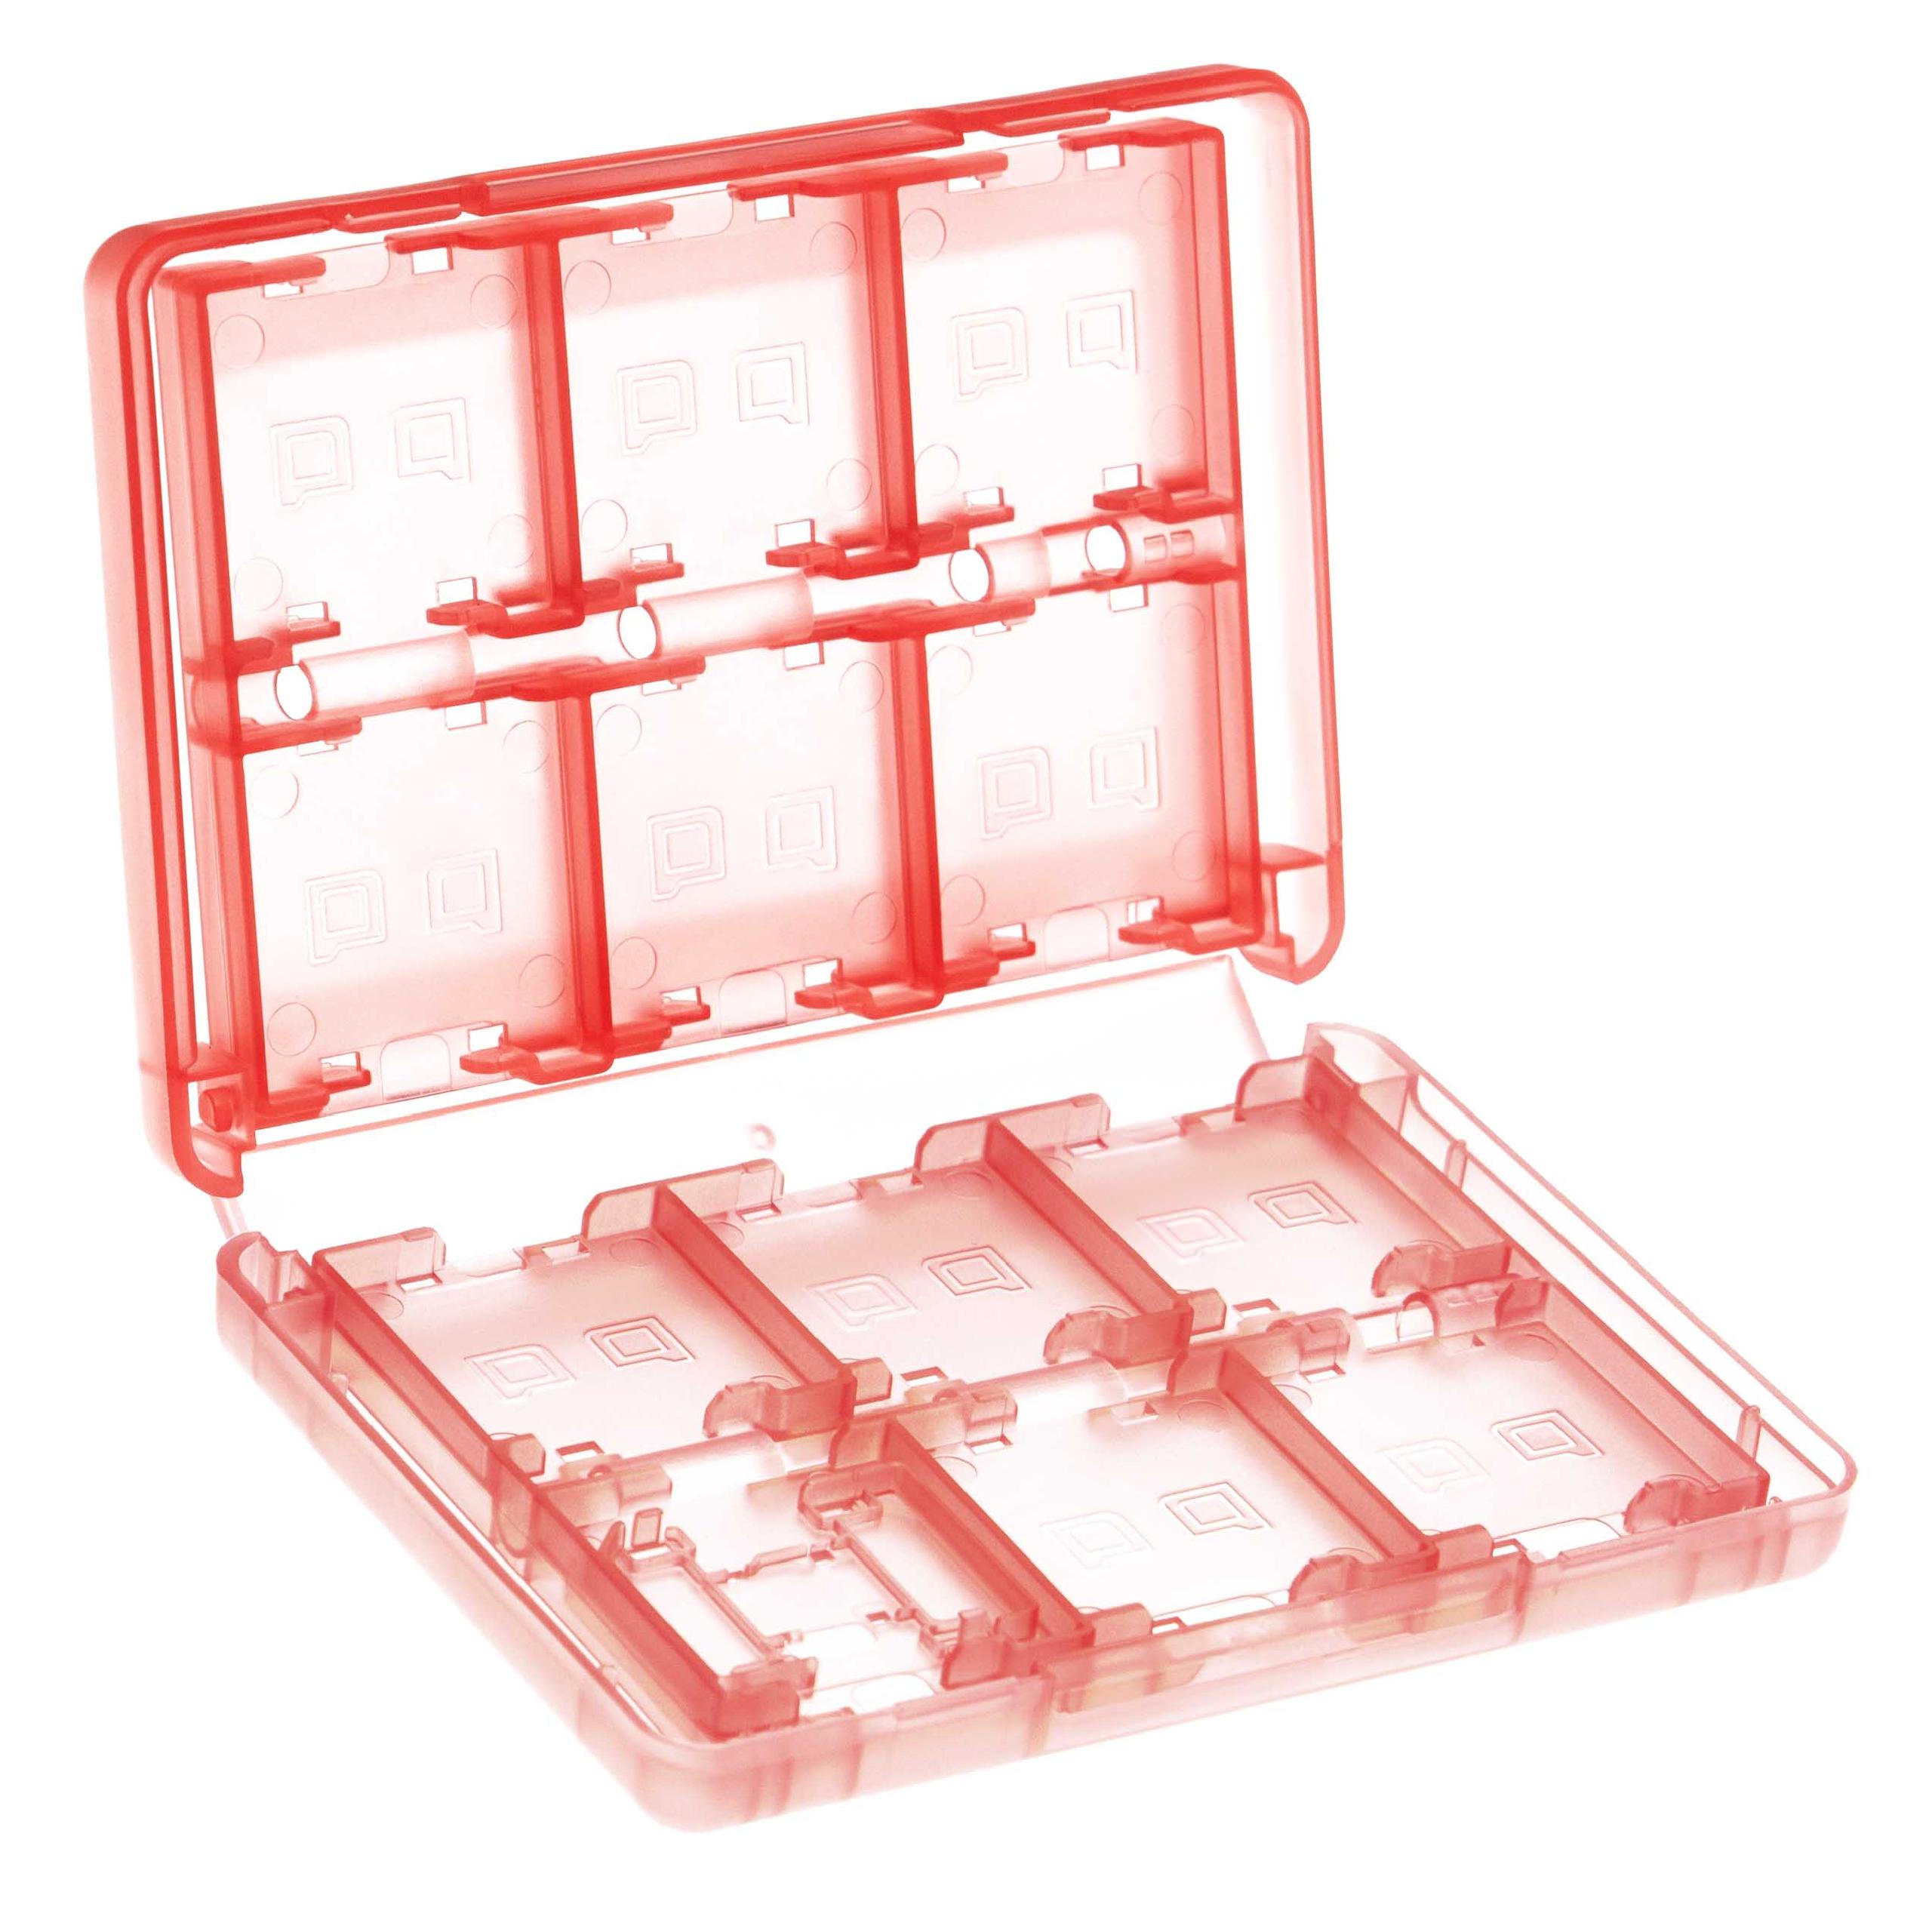 Carrying Case for Console Games and Memory Cards suitable for Nintendo 3DS - plastic, transparent / red